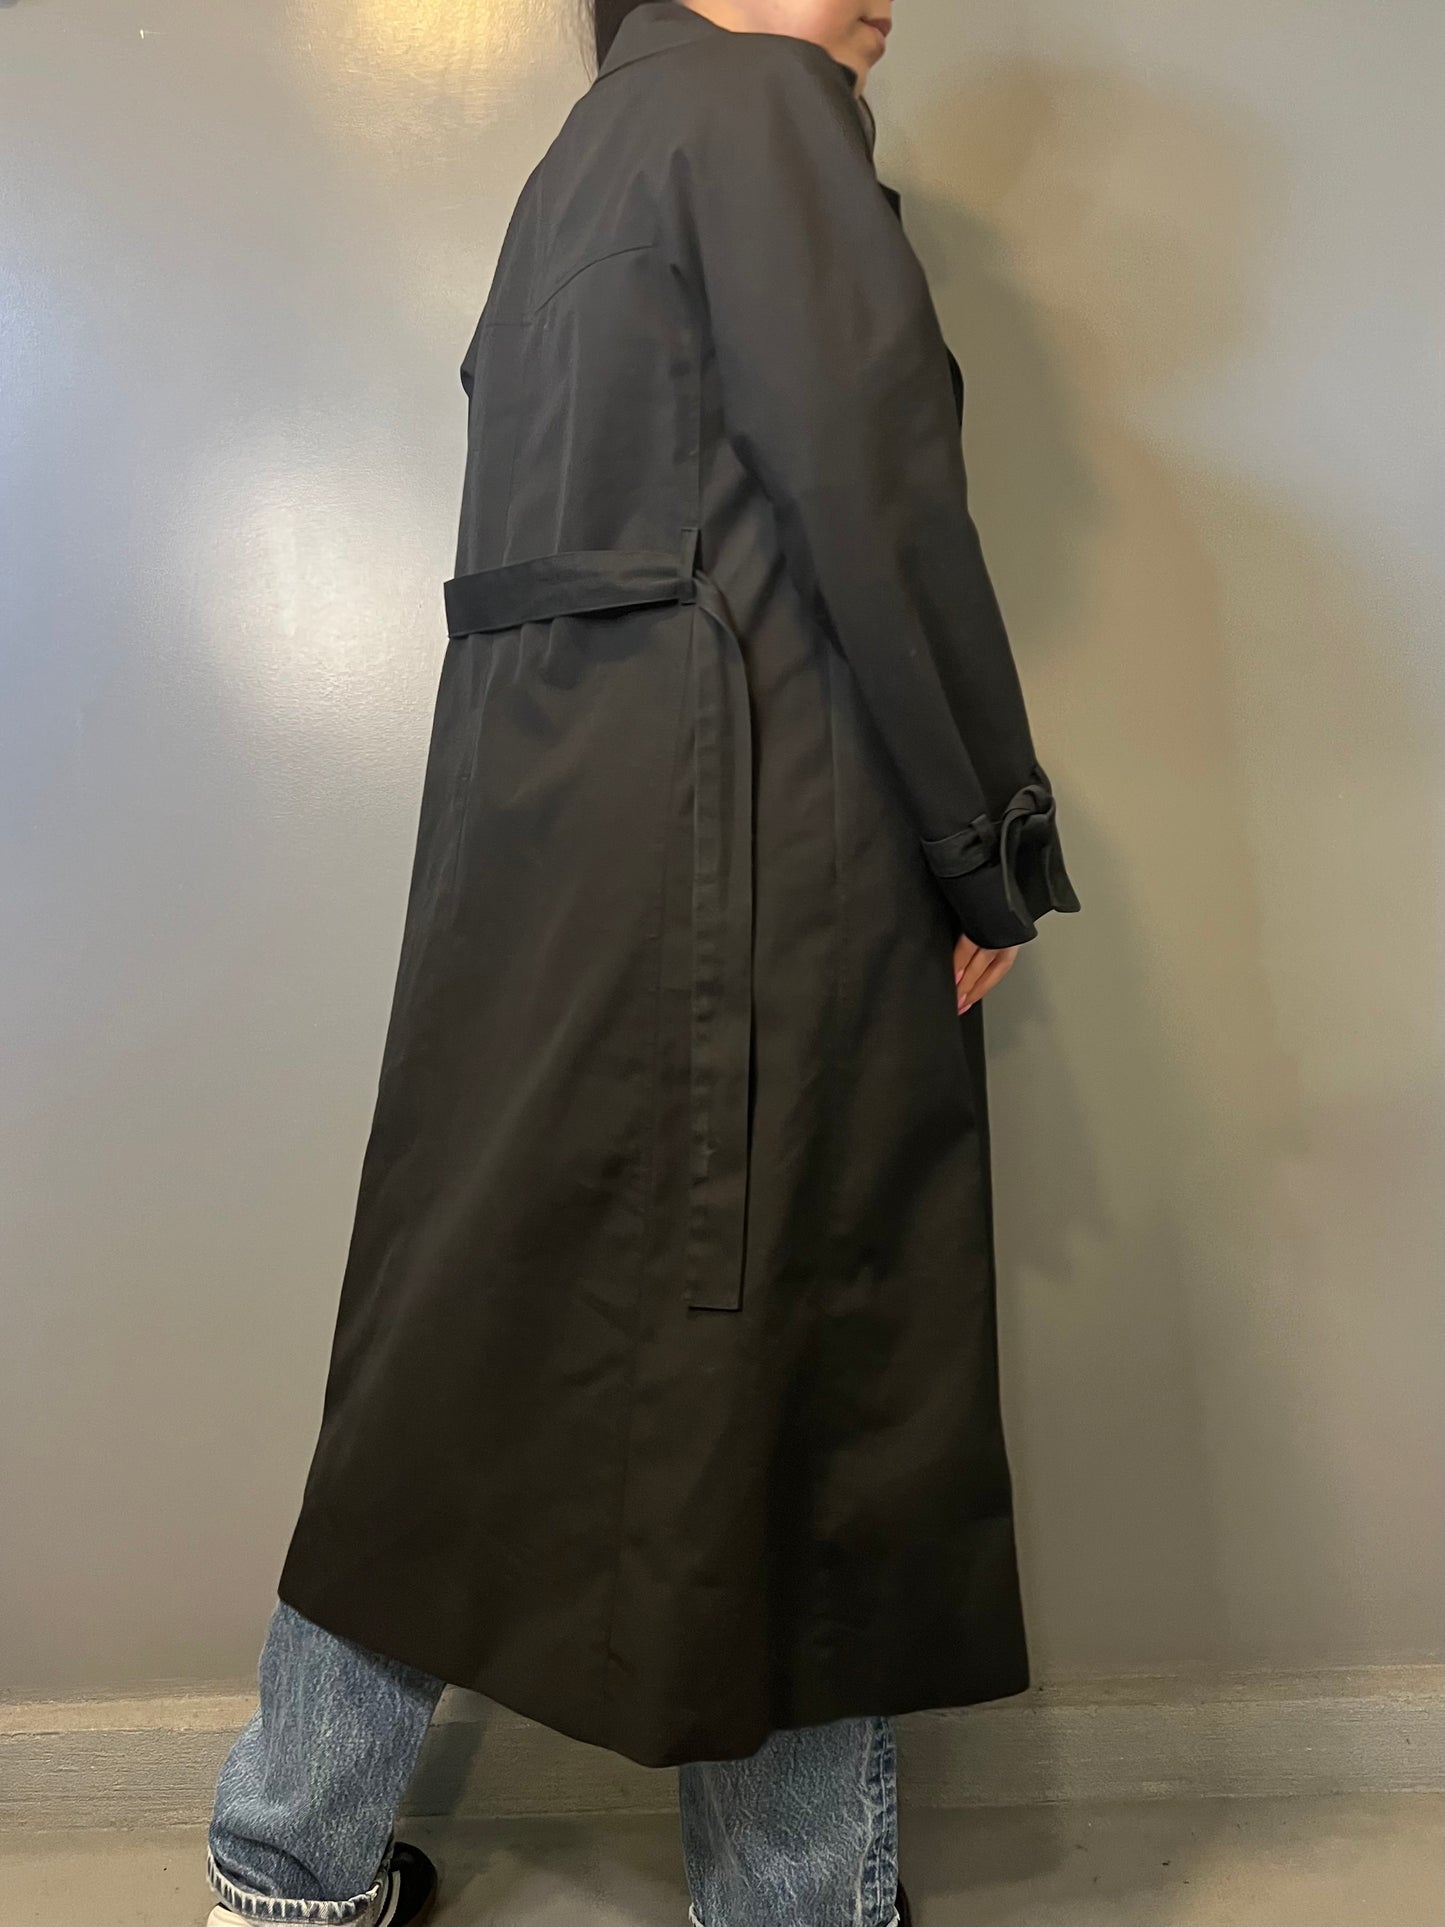 90's Roth-Le Cover Sport Black Trench Coat - S/M